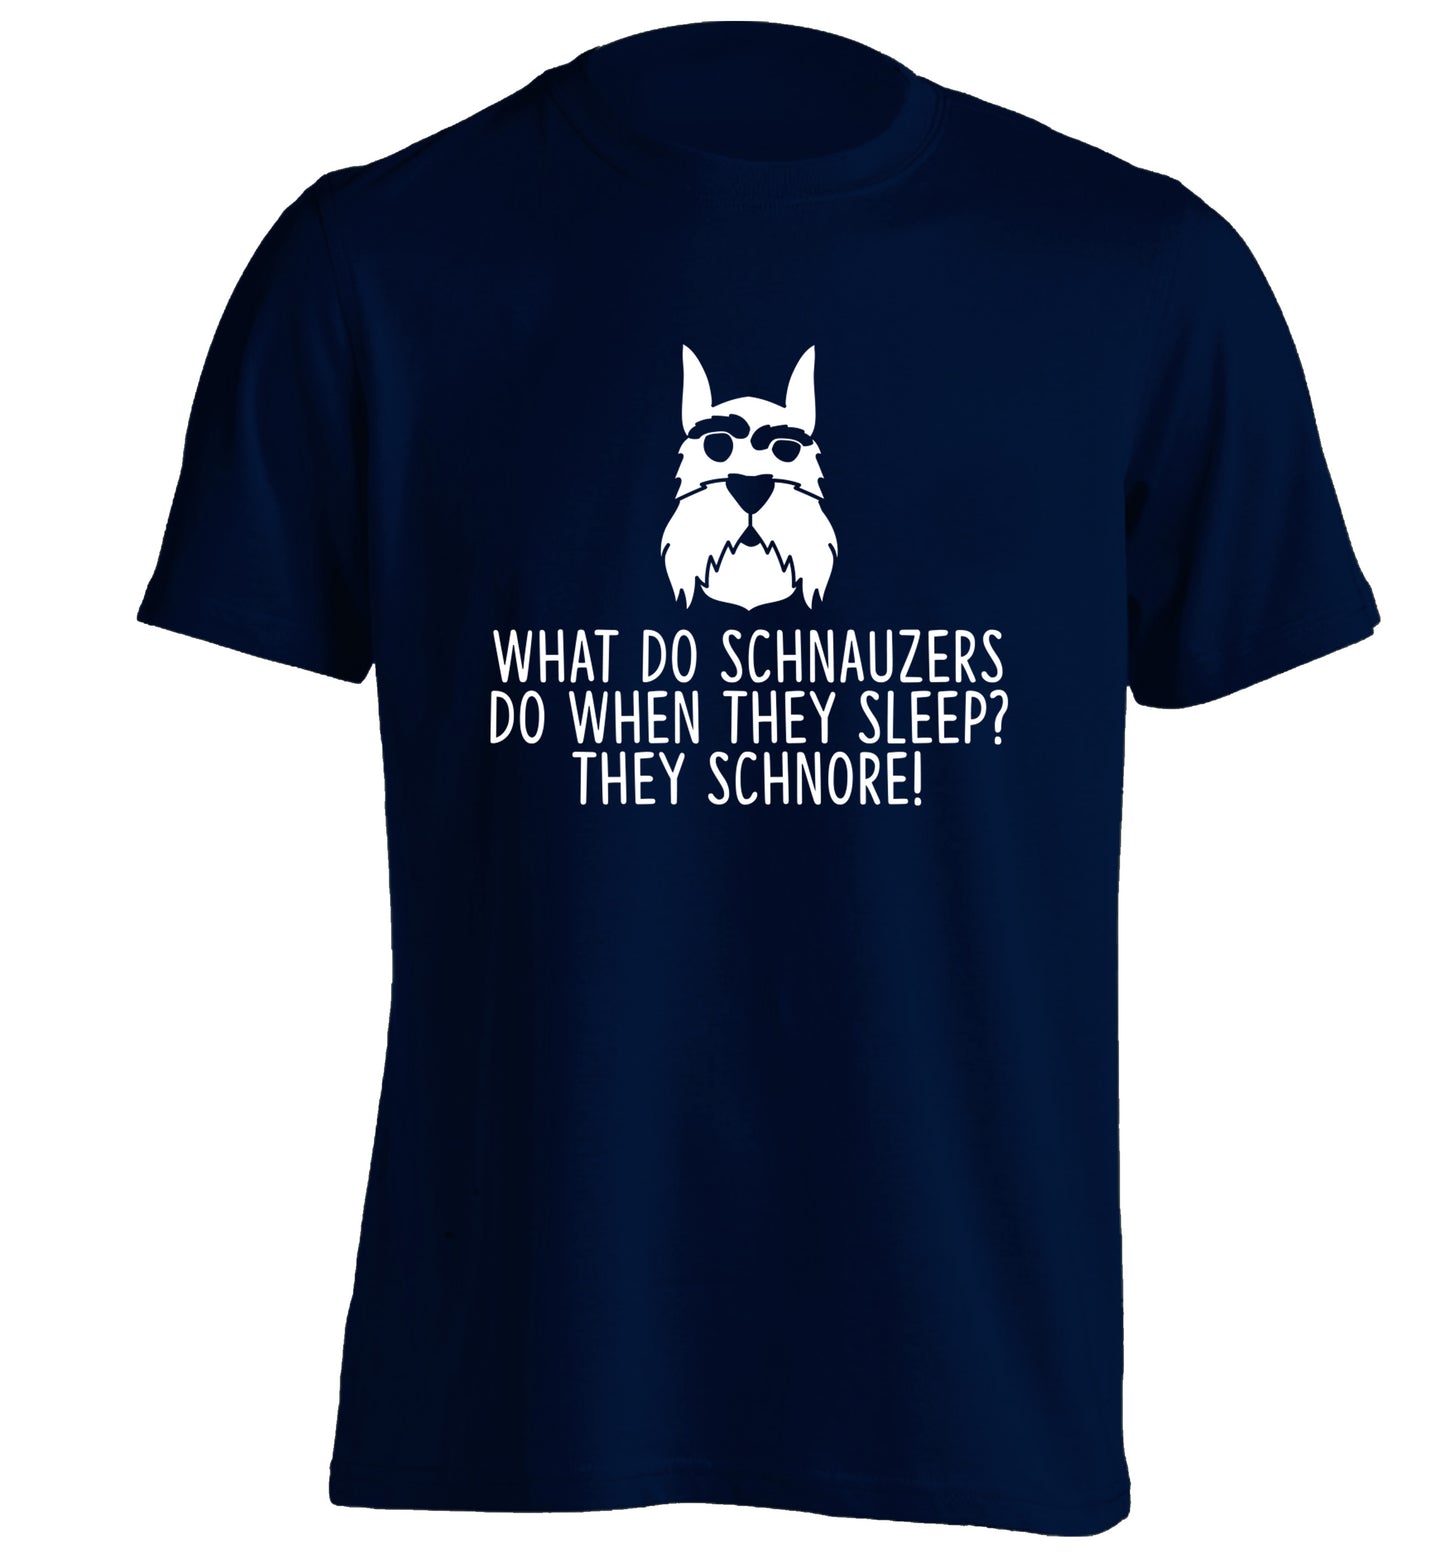 What do schnauzers do when they sleep? Schnore! adults unisex navy Tshirt 2XL